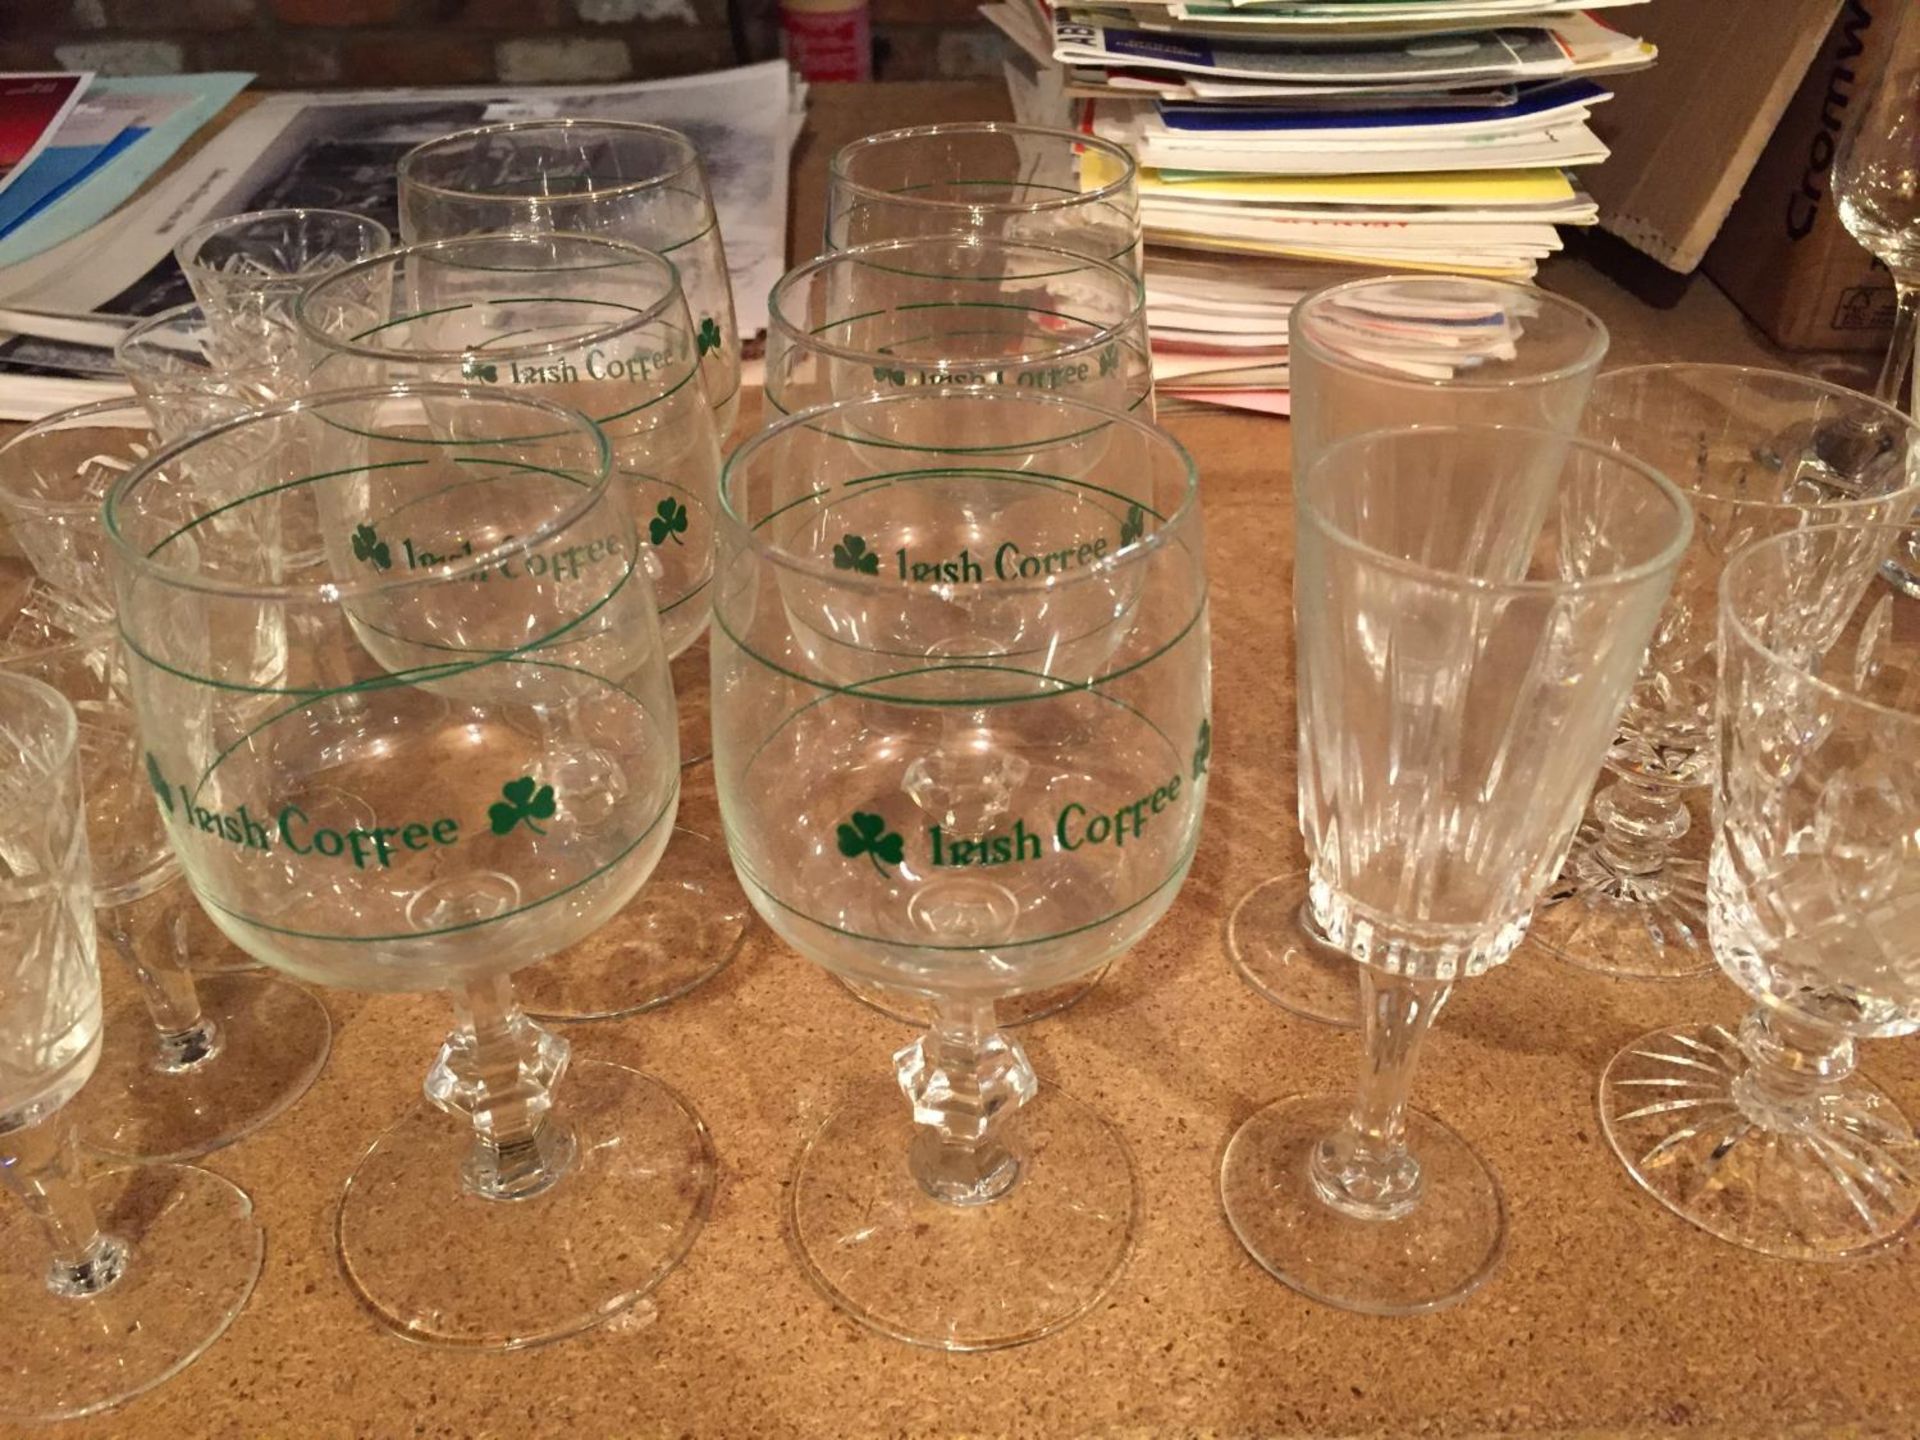 A LARGE COLLECTION OF VARIOUS GLASSES TO INCLUDE WINE, LIQUOR, IRISH COFFEE ETC - Image 4 of 5